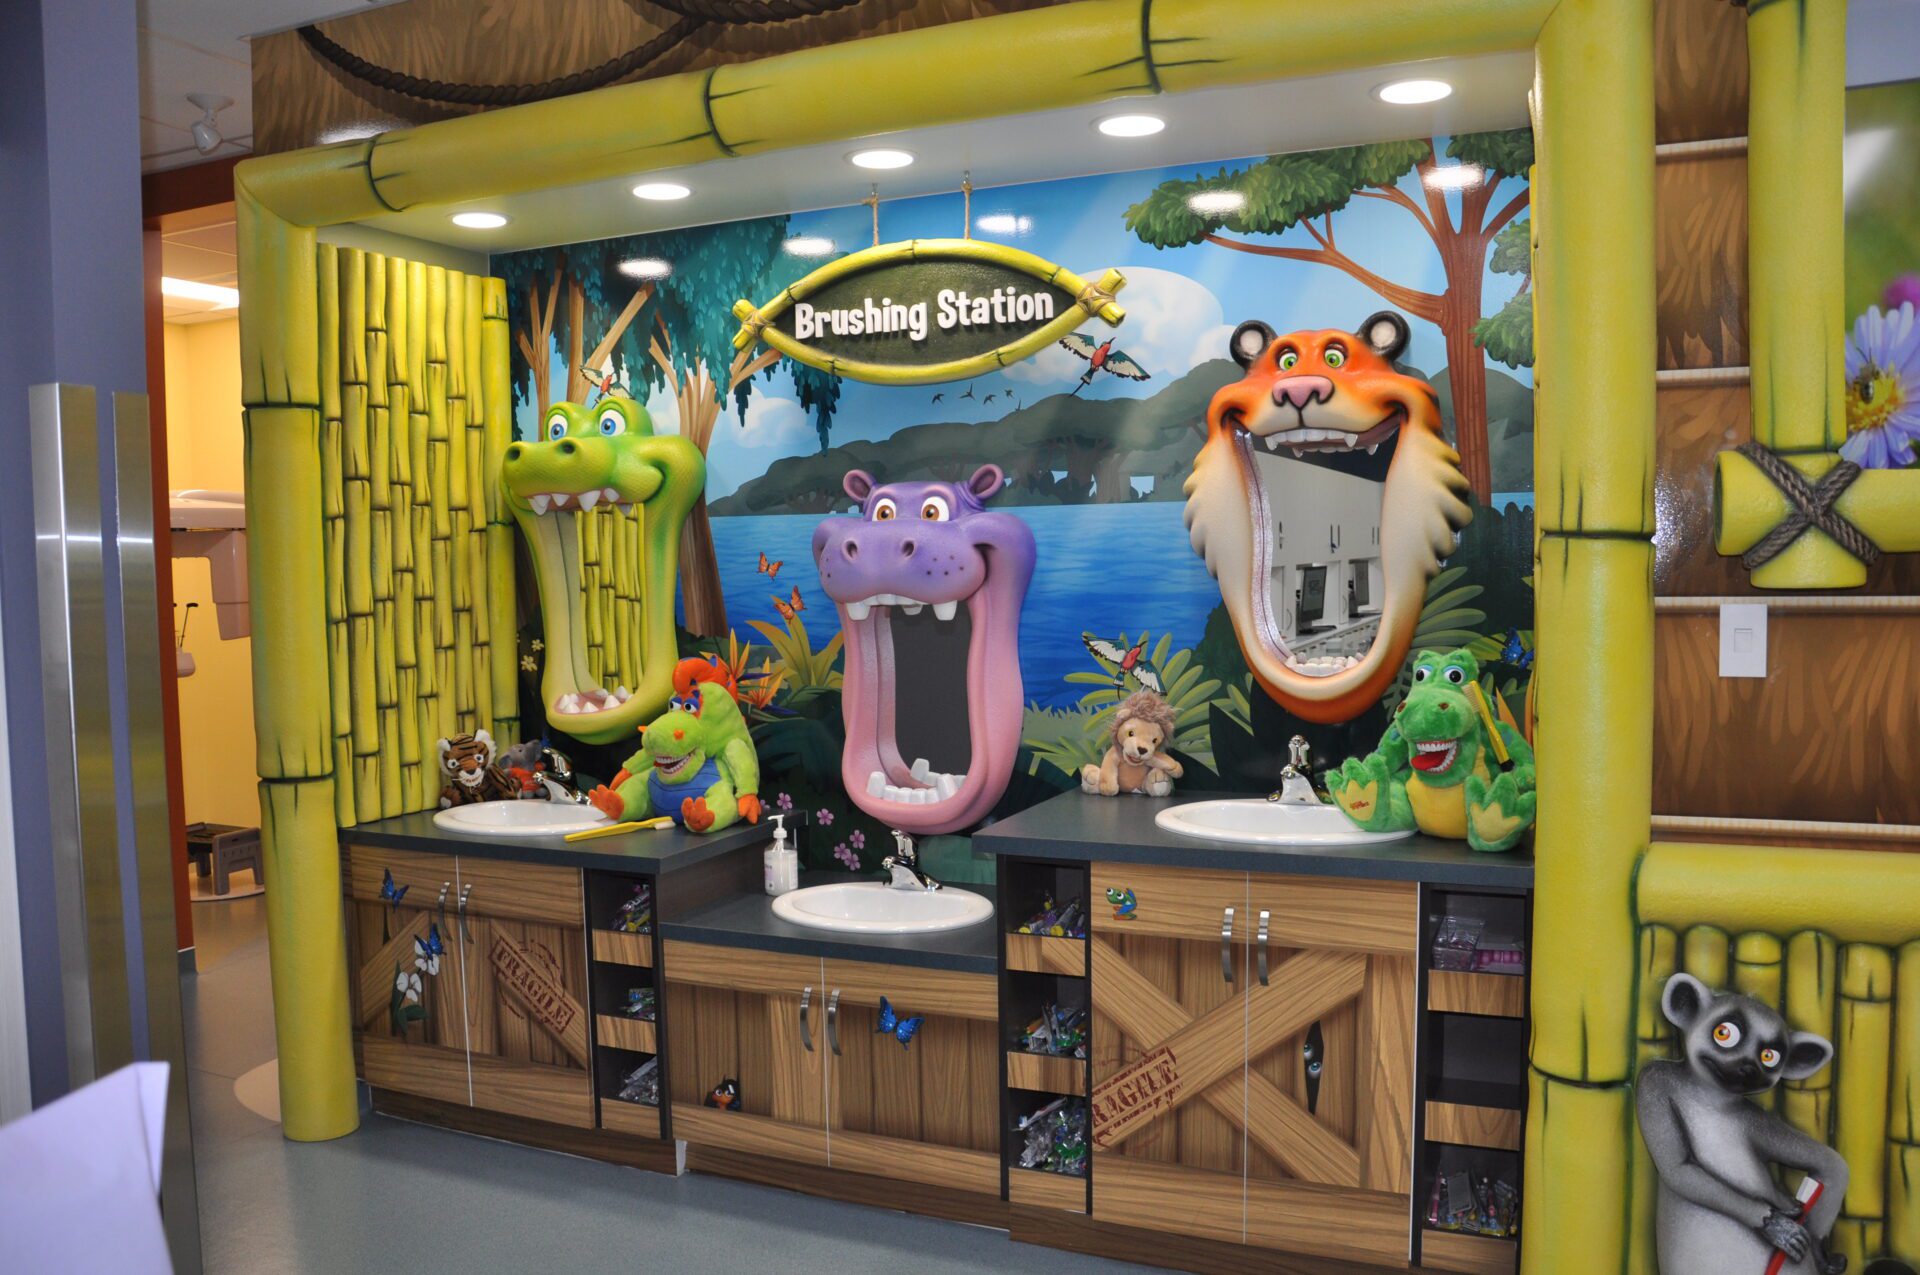 Cool Smiles Brushing Station featuring mirrors with cartoon styled animal shapes<br />
